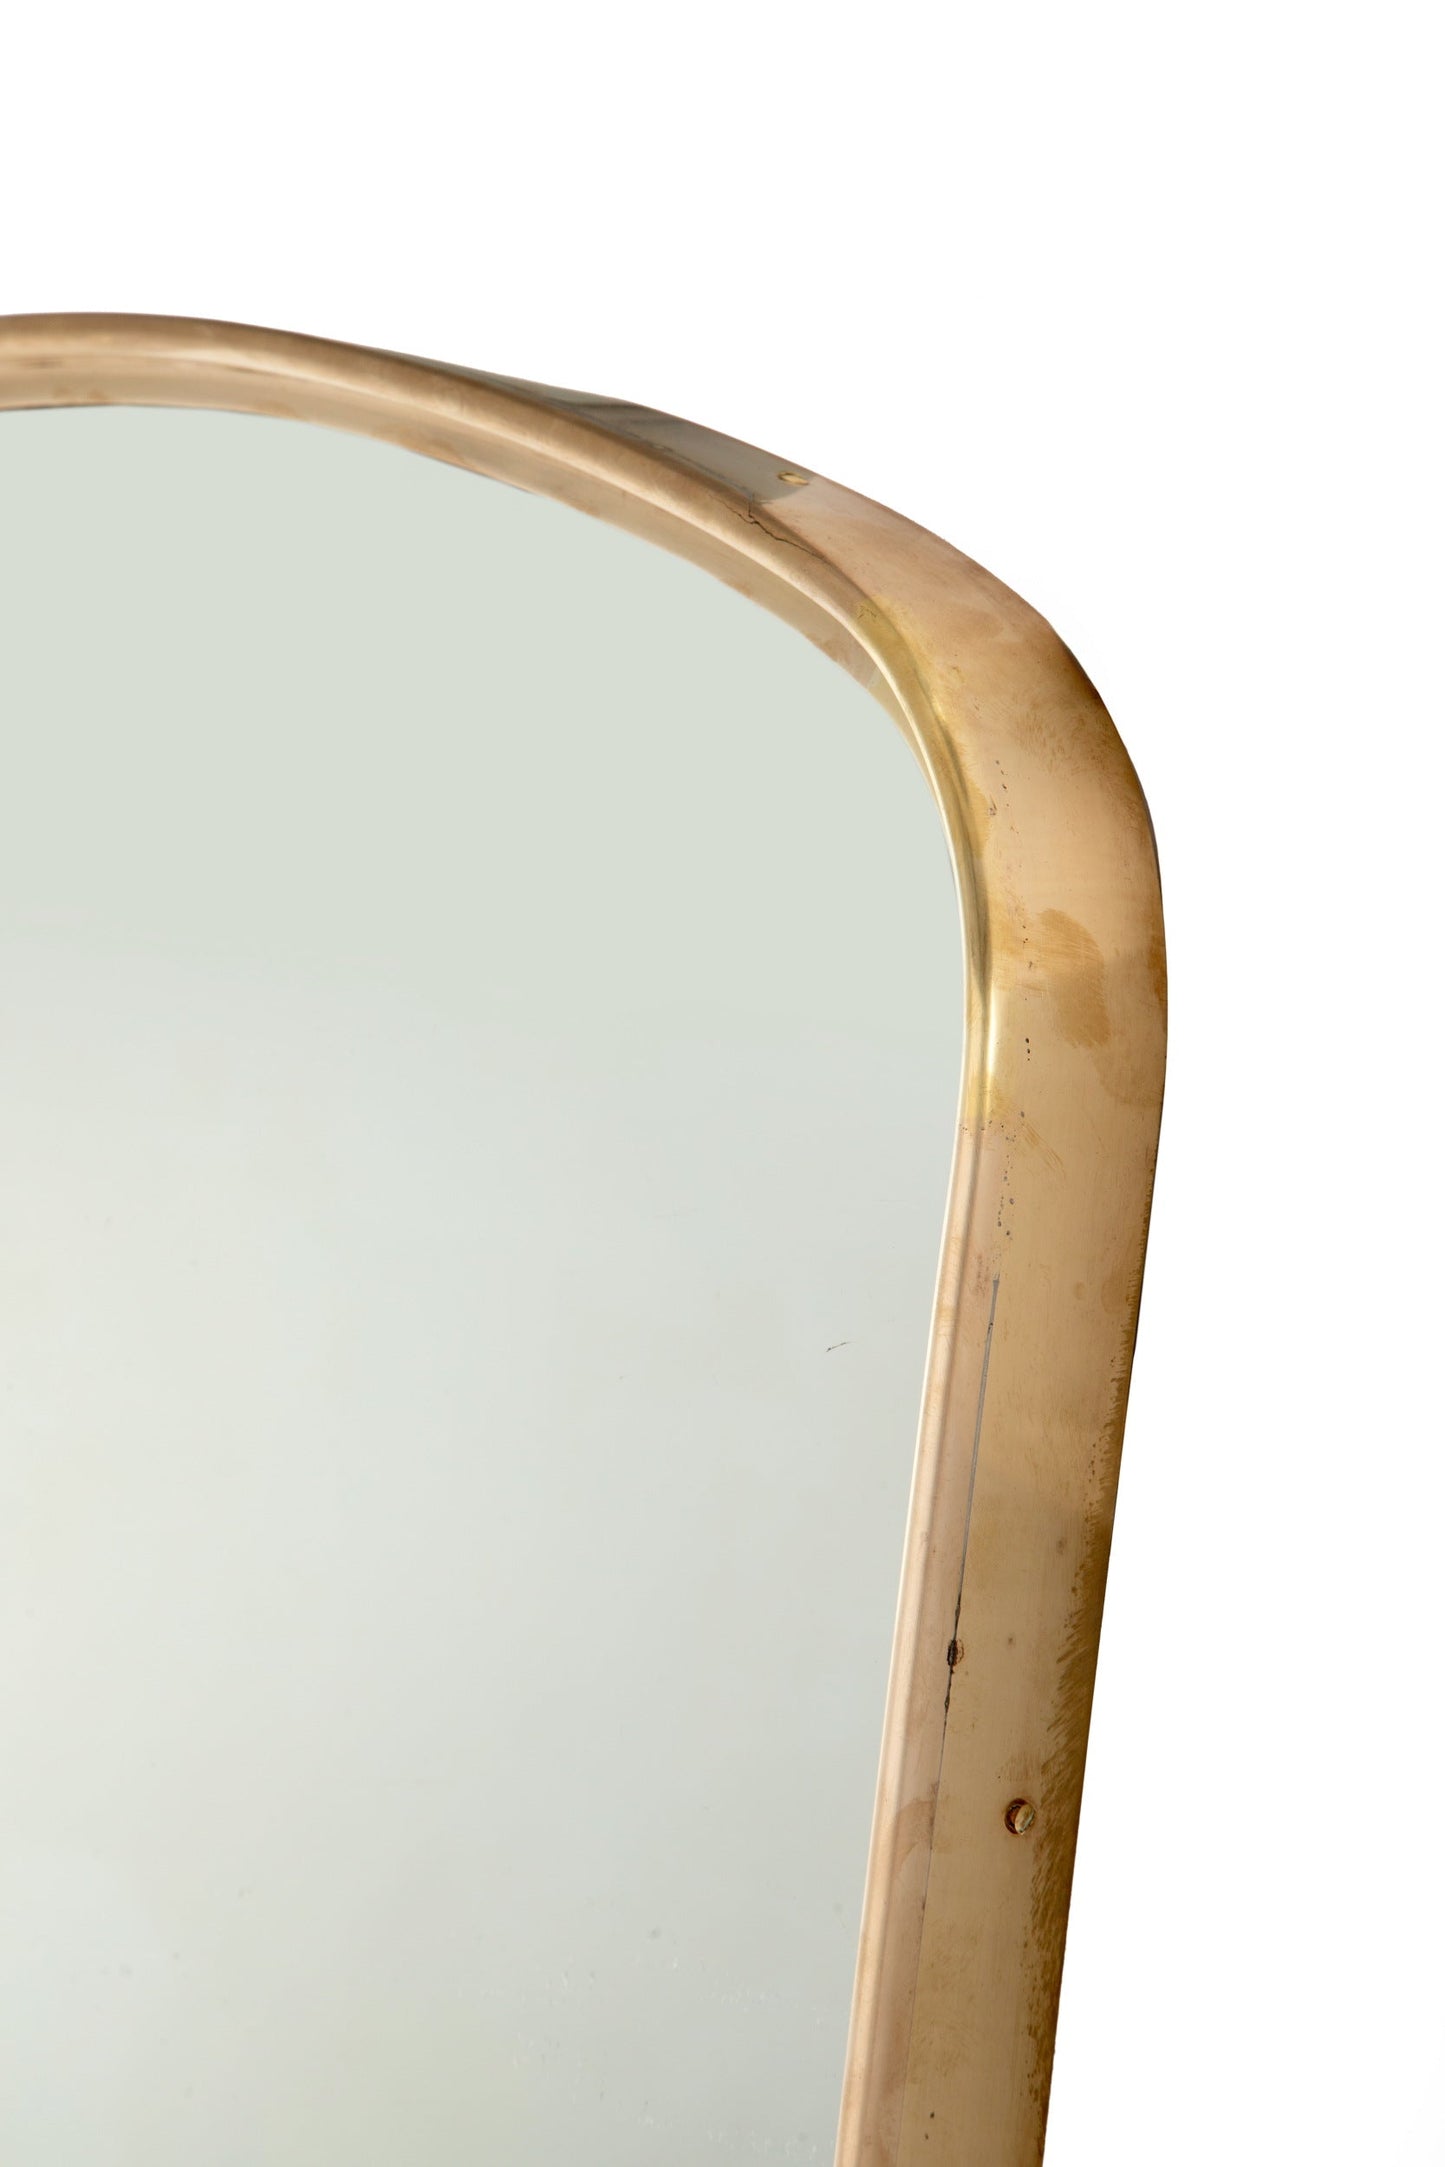 Gio Ponti mirror from the 1950s in brass